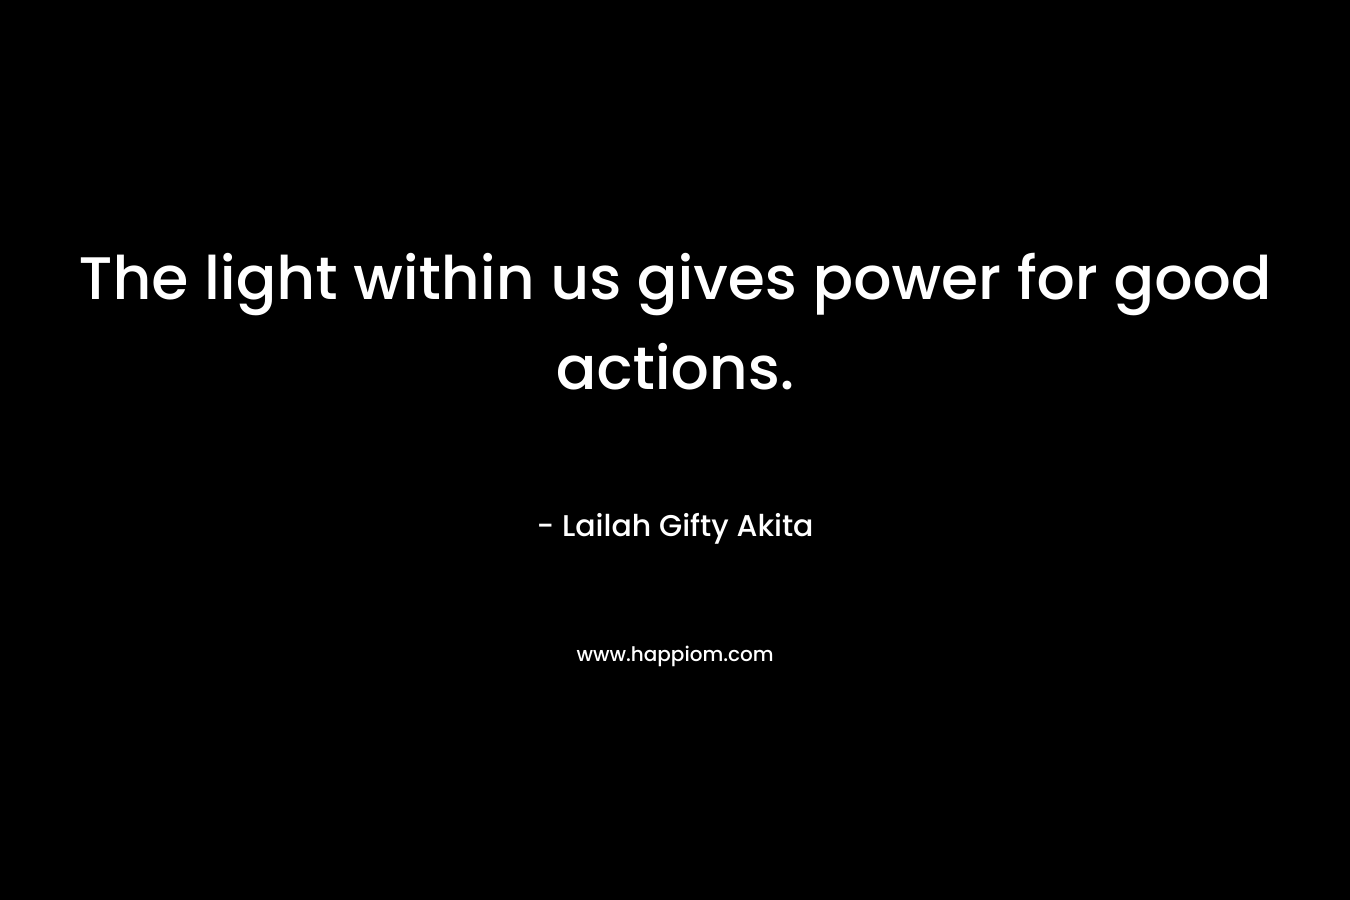 The light within us gives power for good actions.